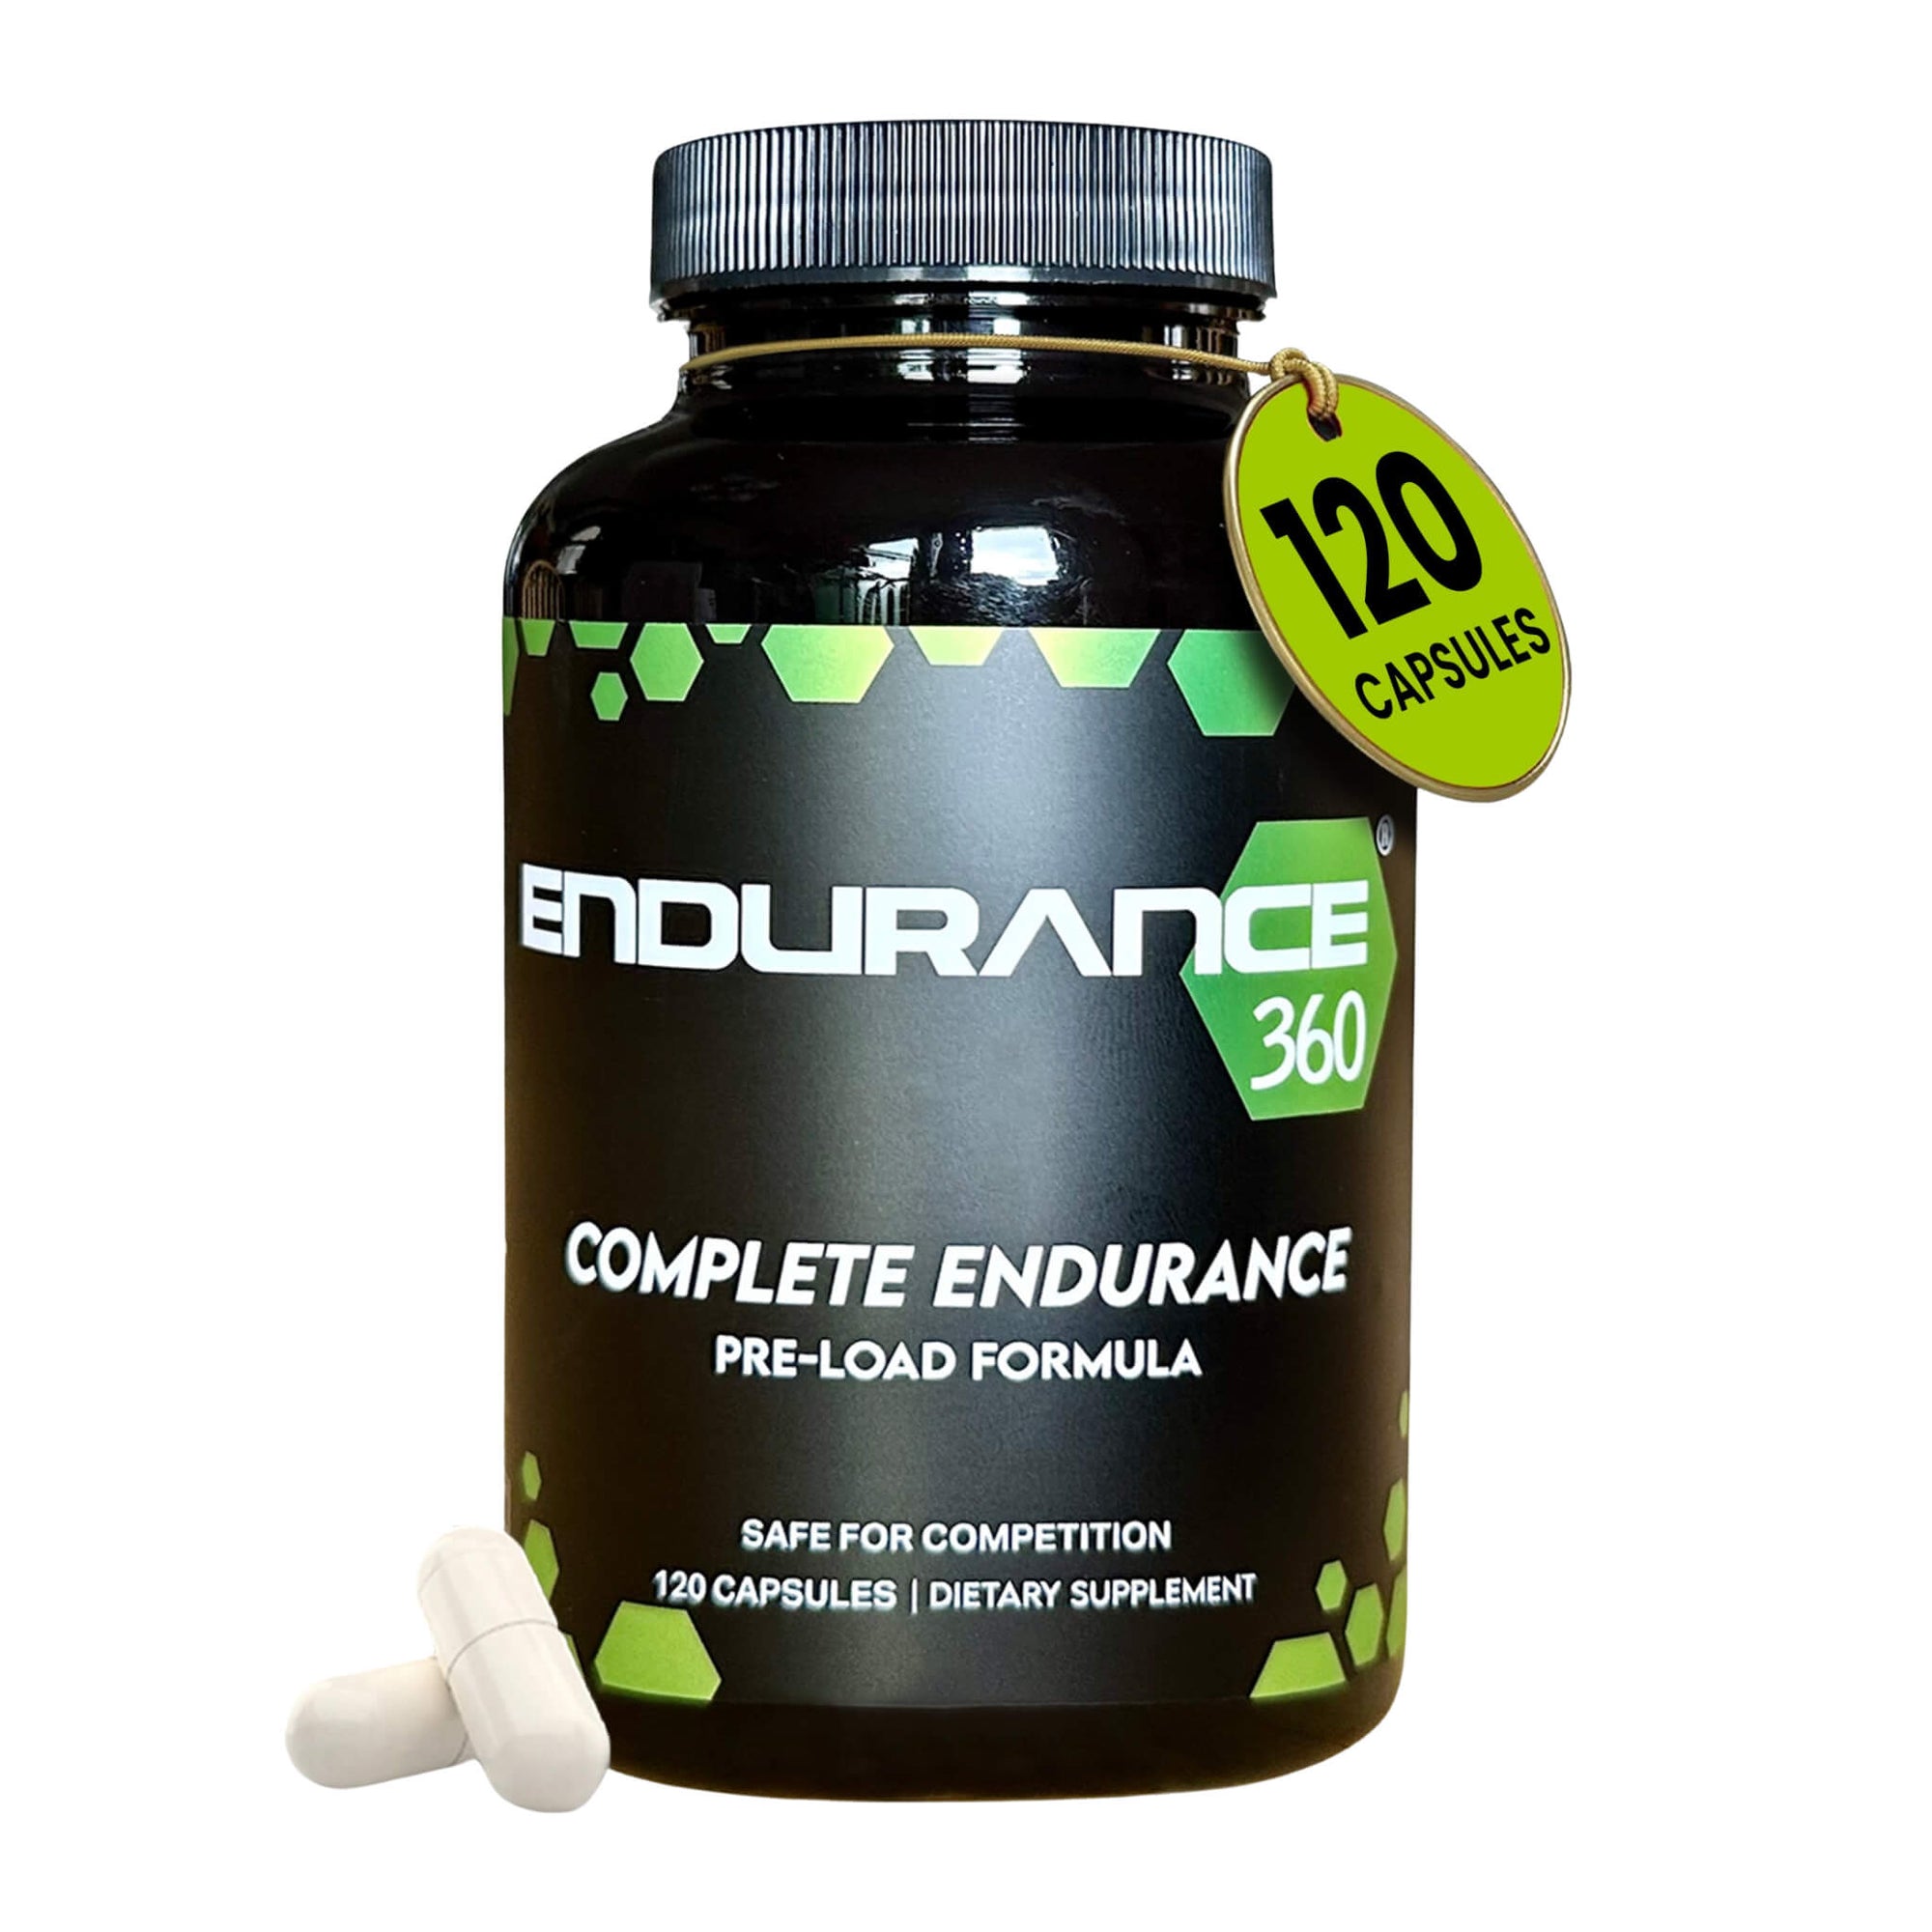 Endurance360® Complete for Muscle Endurance, Recovery and Leg Cramps